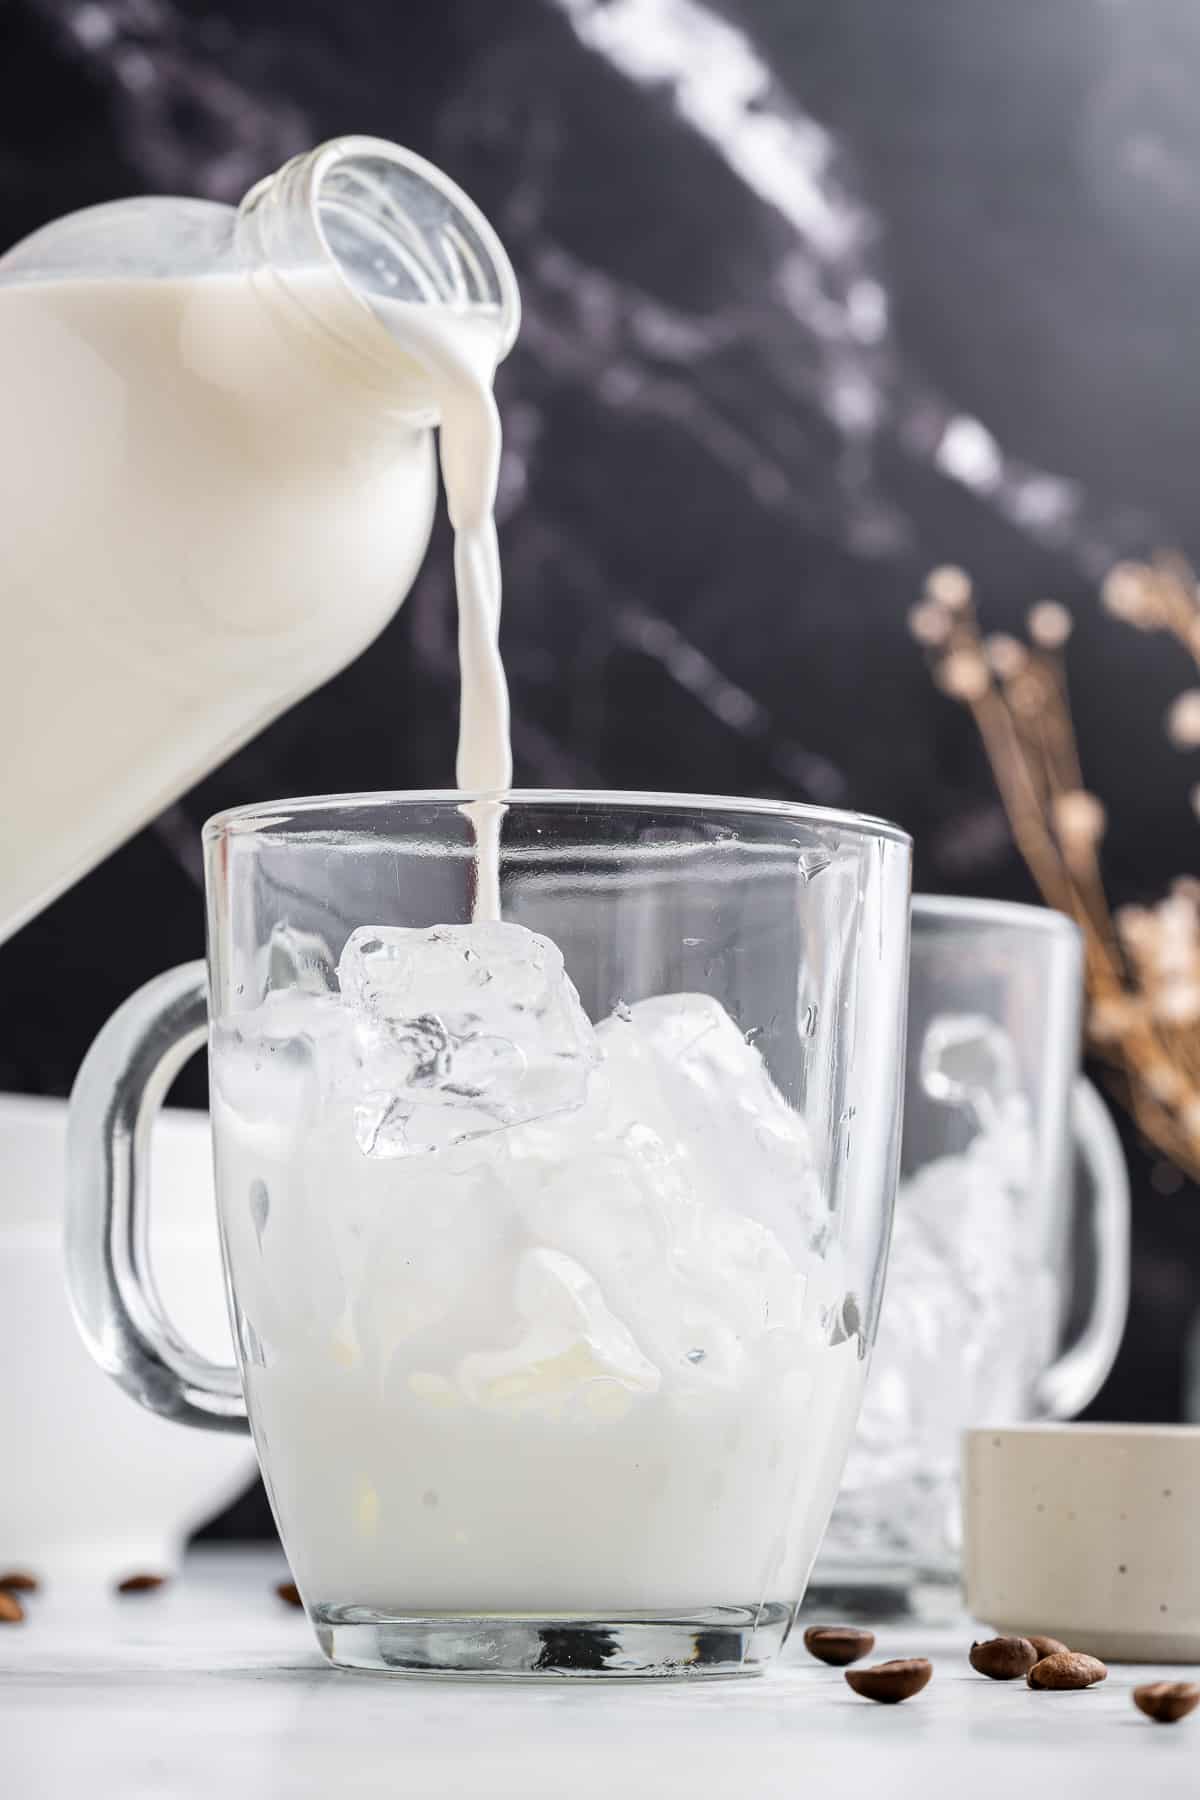 Milk being poured into a glass of ice.